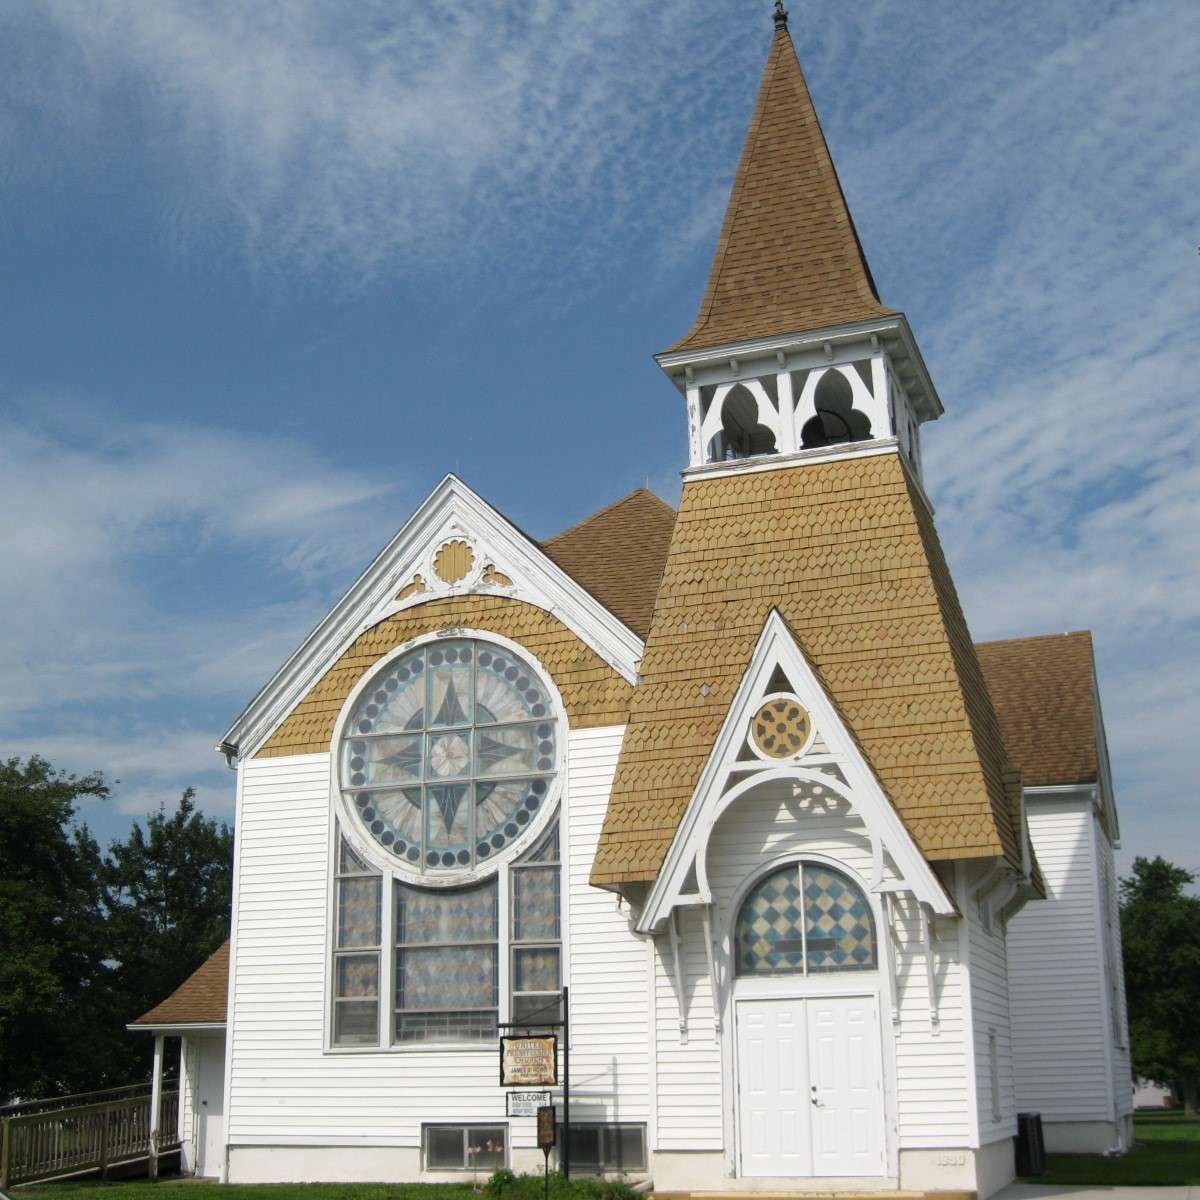 Two story wooden church building with white wooden siding, brown shingled roof, stained glass windows, steeple tower with bell